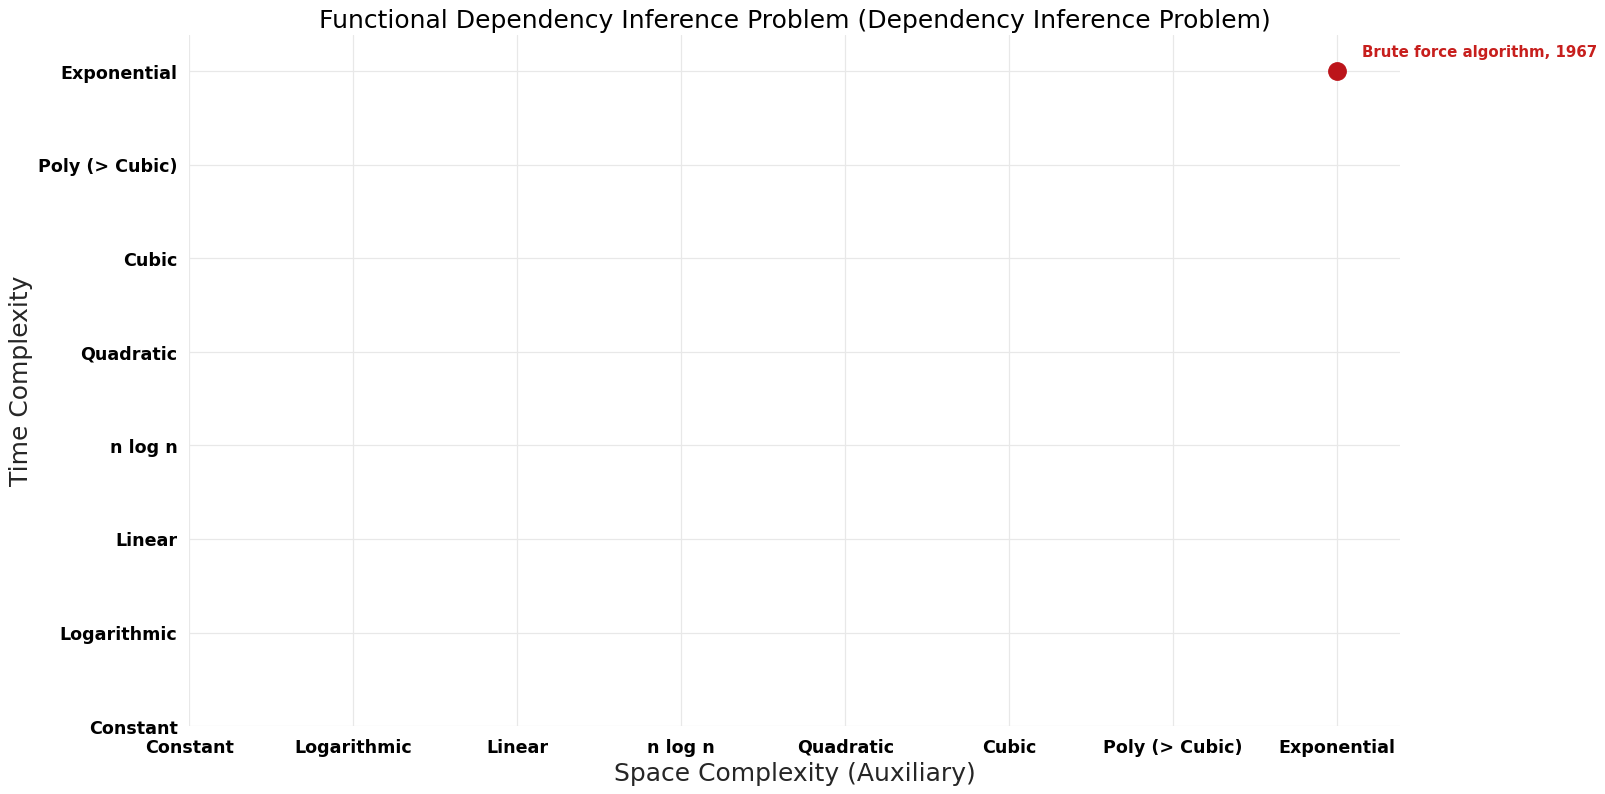 Dependency Inference Problem - Functional Dependency Inference Problem - Pareto Frontier.png